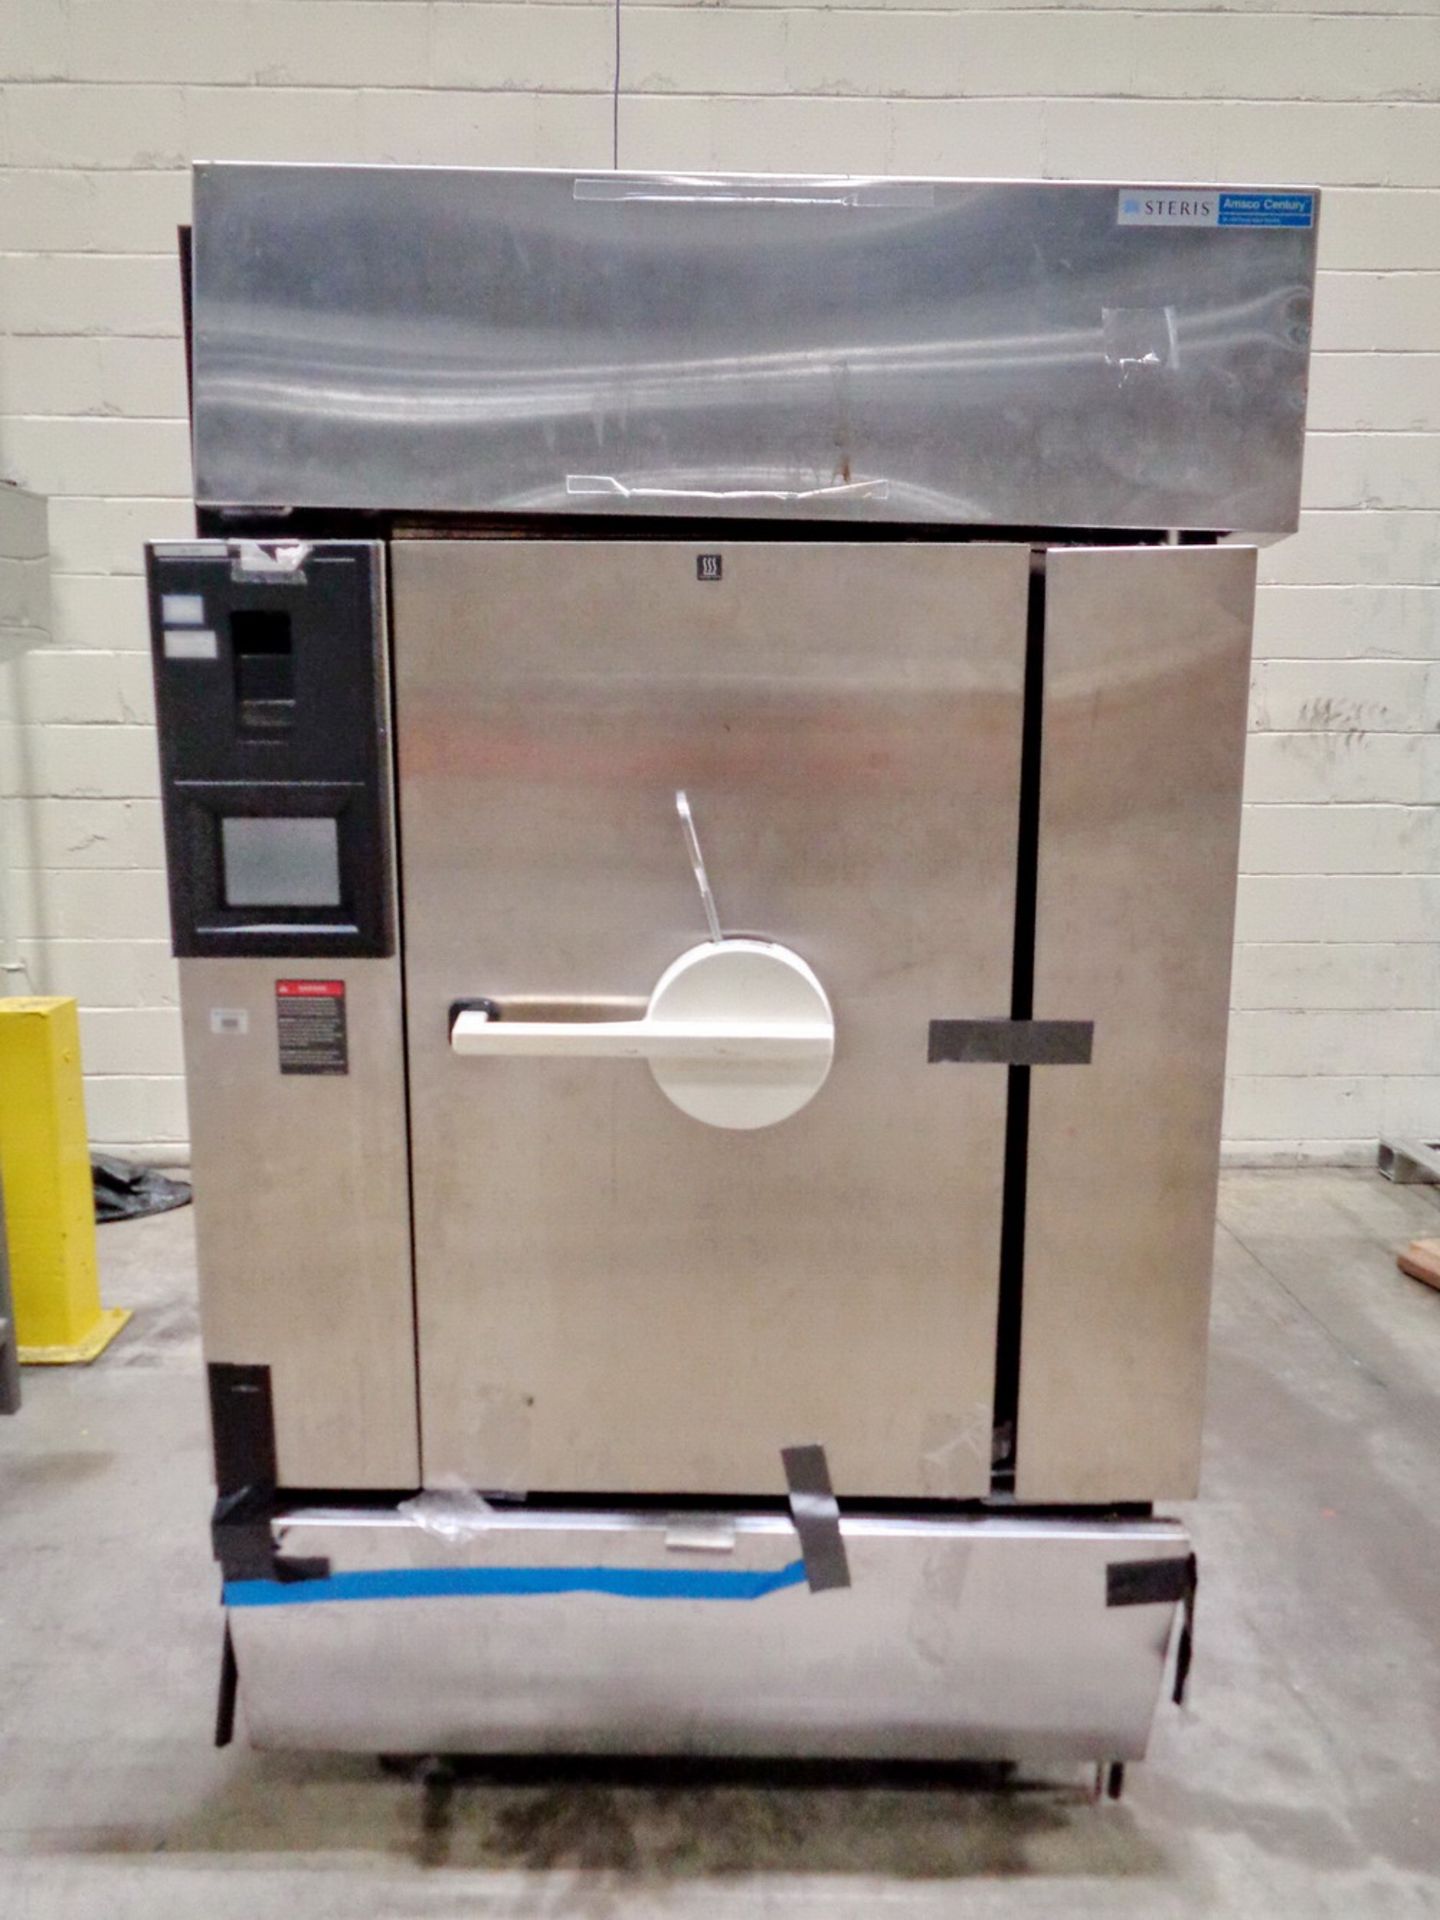 Steris Autoclave, single door, jacketed chamber, new 2006, S/N 0806024